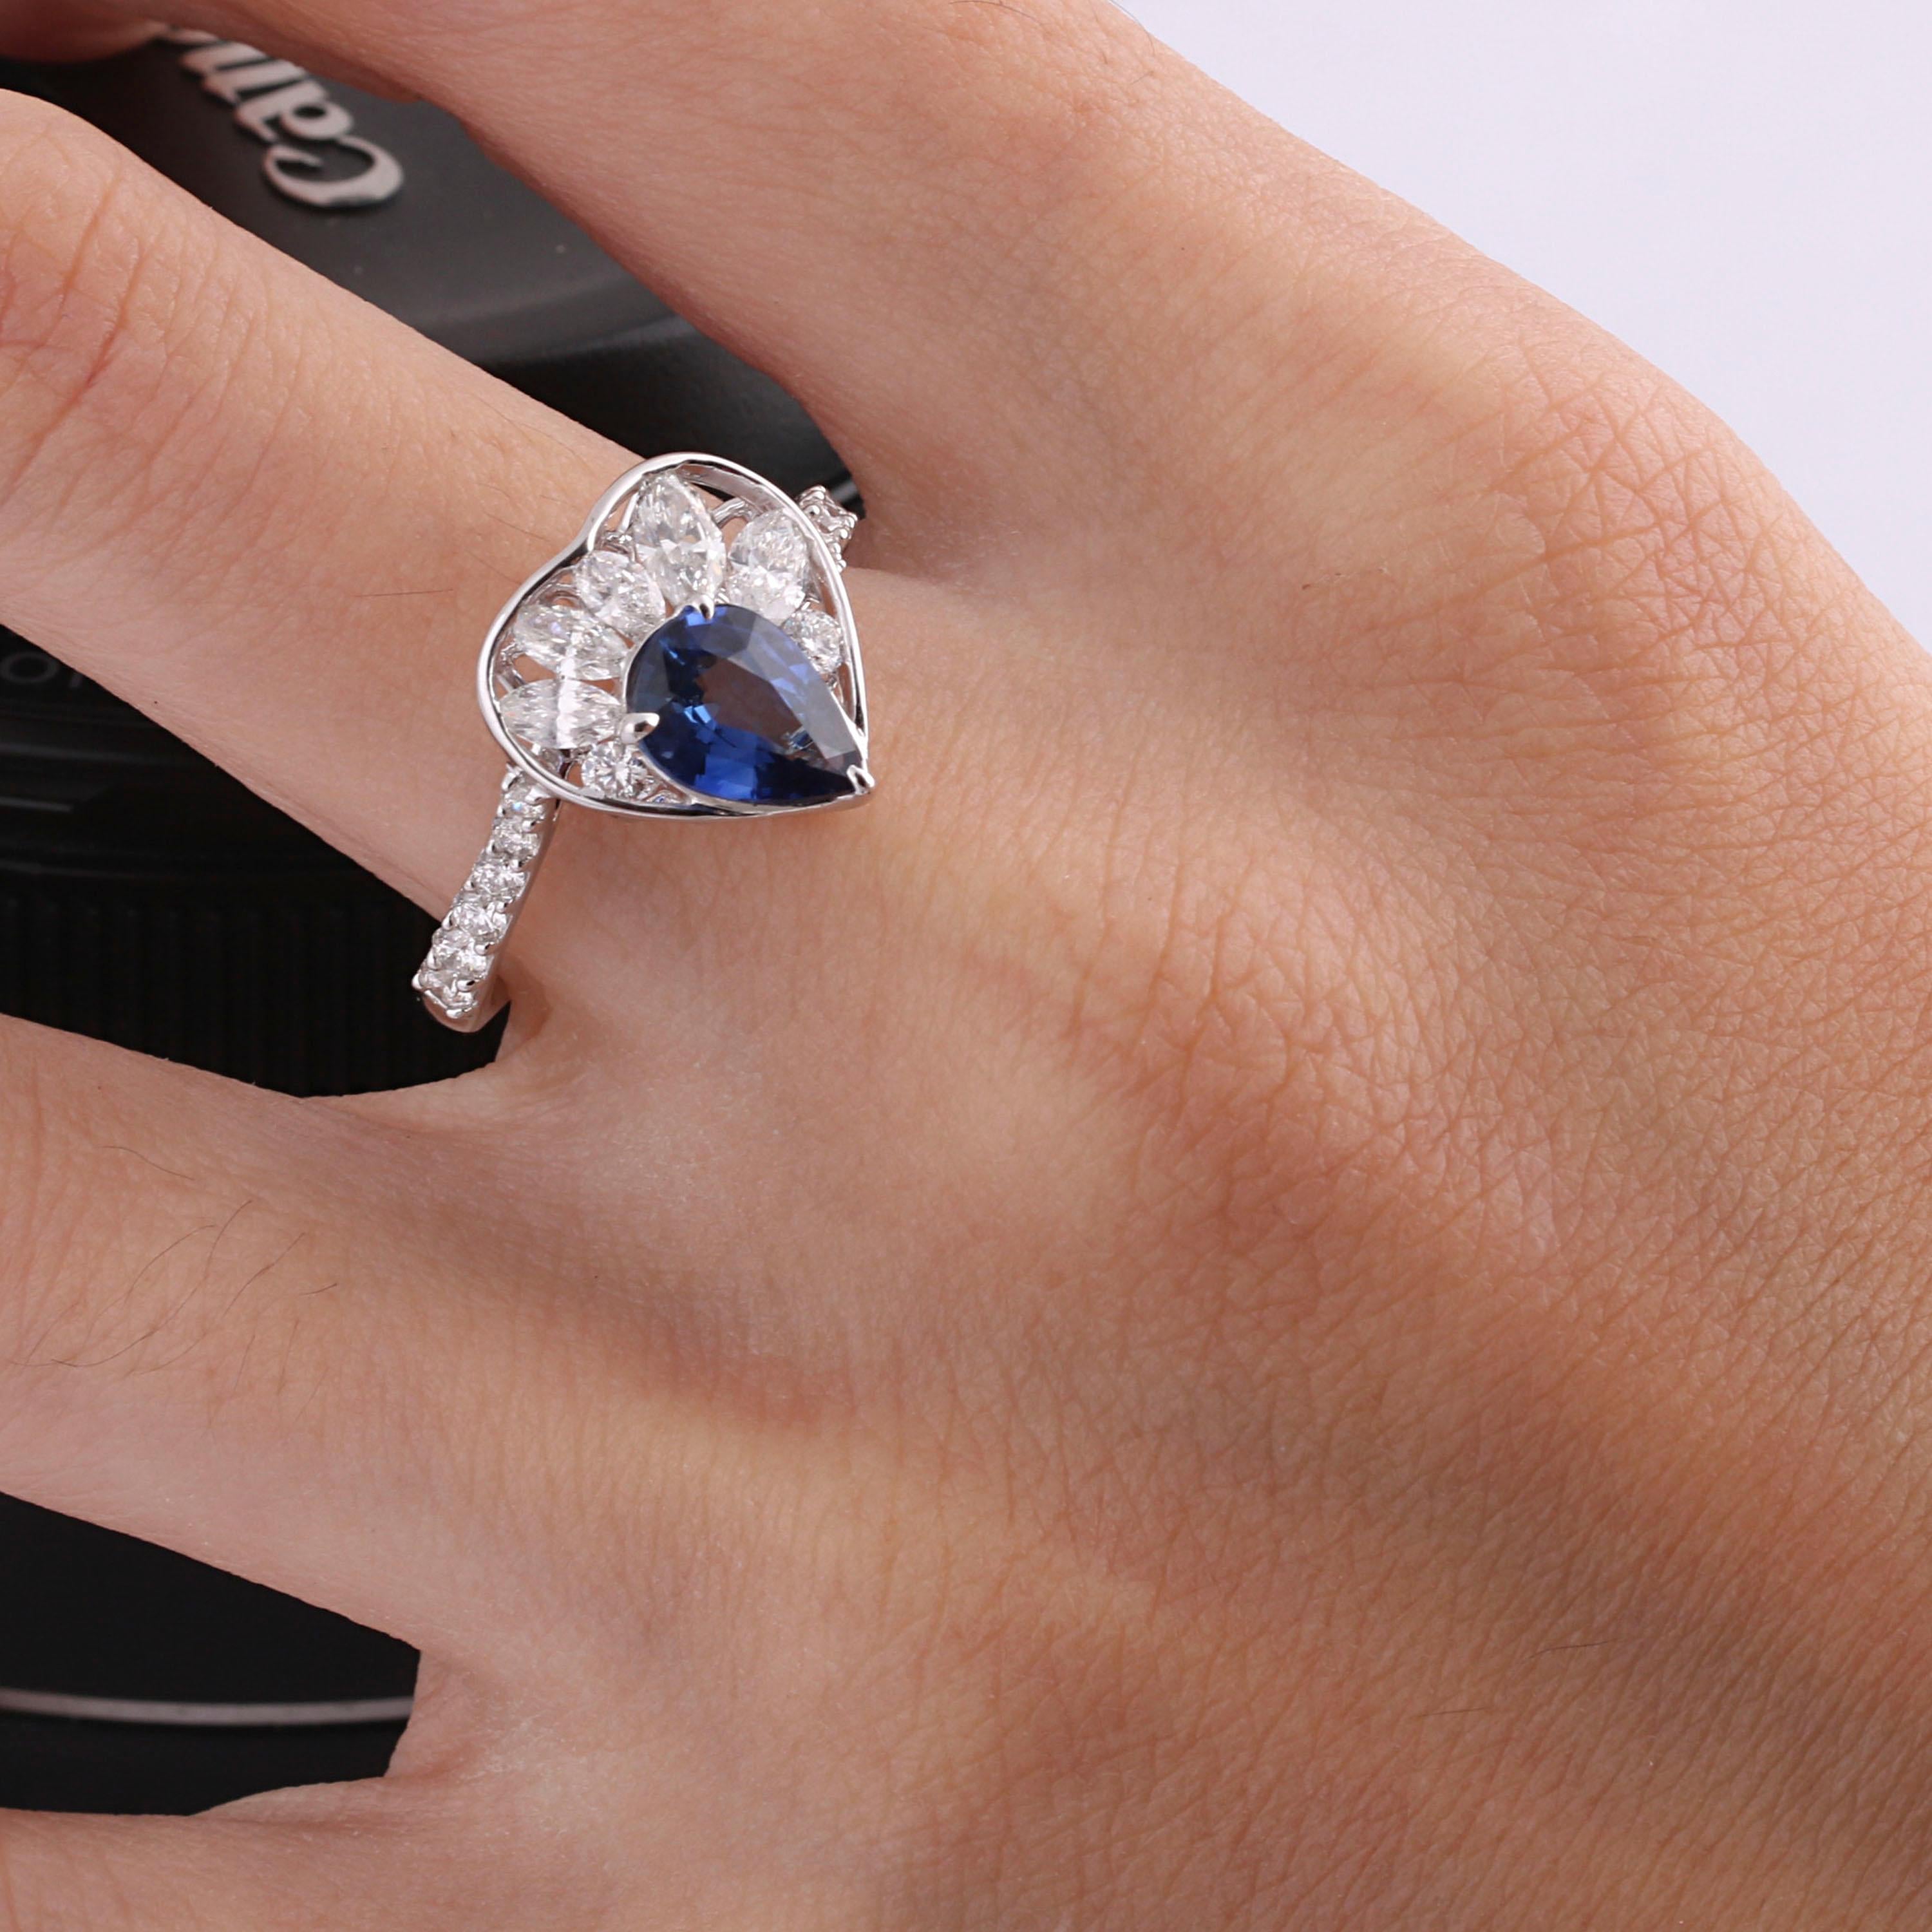 Gross Weight: 4.73 Grams
Diamond Weight: 0.88 cts
Blue Sapphire Weight: 1.13 cts
Ring Size: US 6.5 (Resizing Can be Done)
IGI Certified

Video of the product can be shared upon request.

The clever placement of an exquisite pear shaped blue sapphire